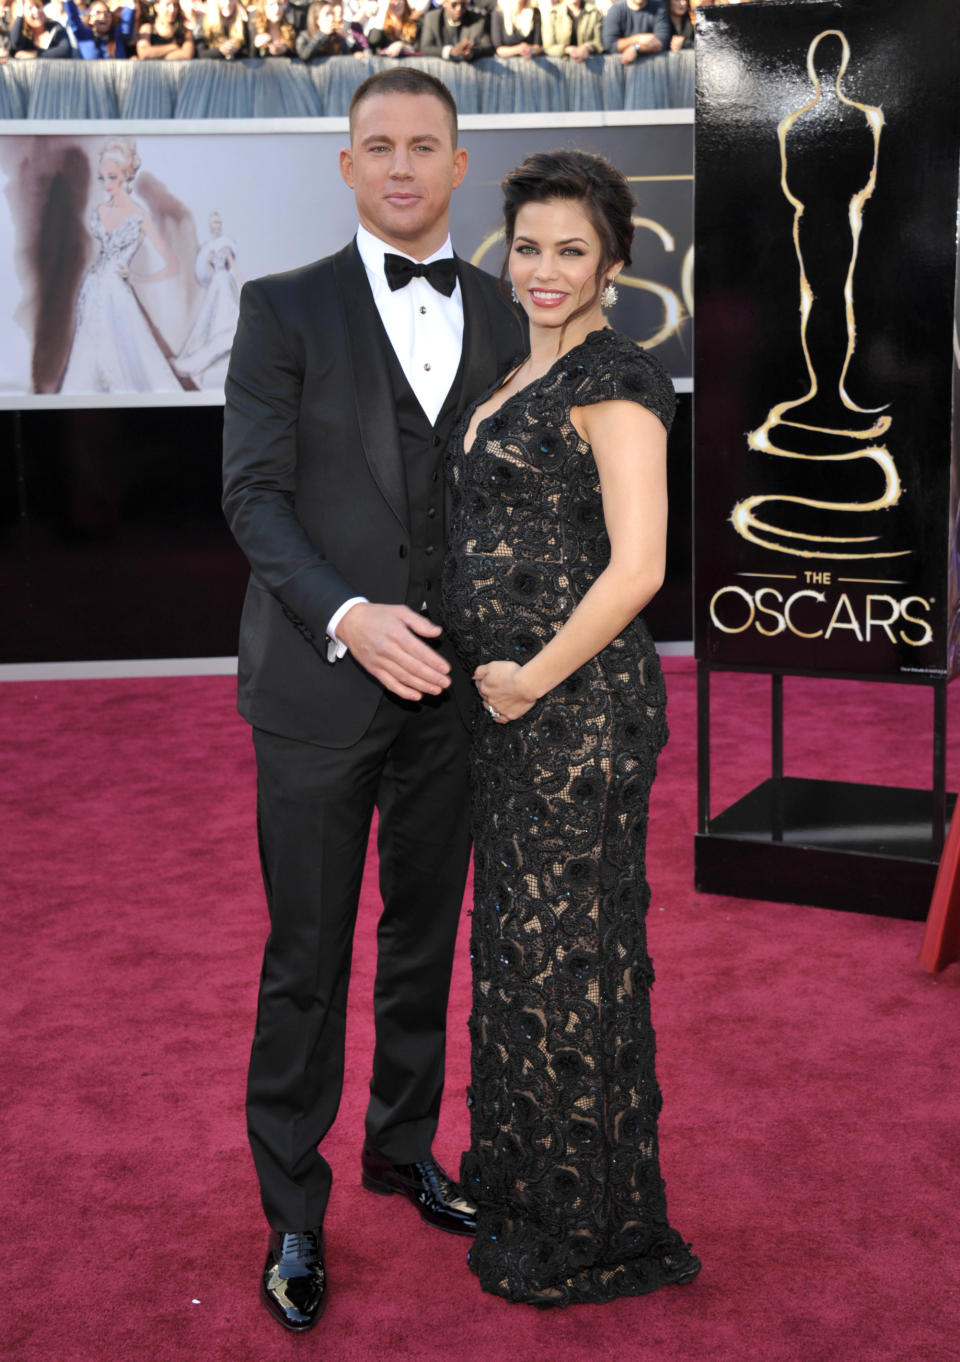 FILE - This Feb. 24, 2013 file photo shows actors Channing Tatum and his pregnant wife Jenna Dewan-Tatum at the 85th Academy Awards at the Dolby Theatre in Los Angeles. Fashion experts say a streamlined style best suits a baby bump. (Photo by John Shearer/Invision/AP)